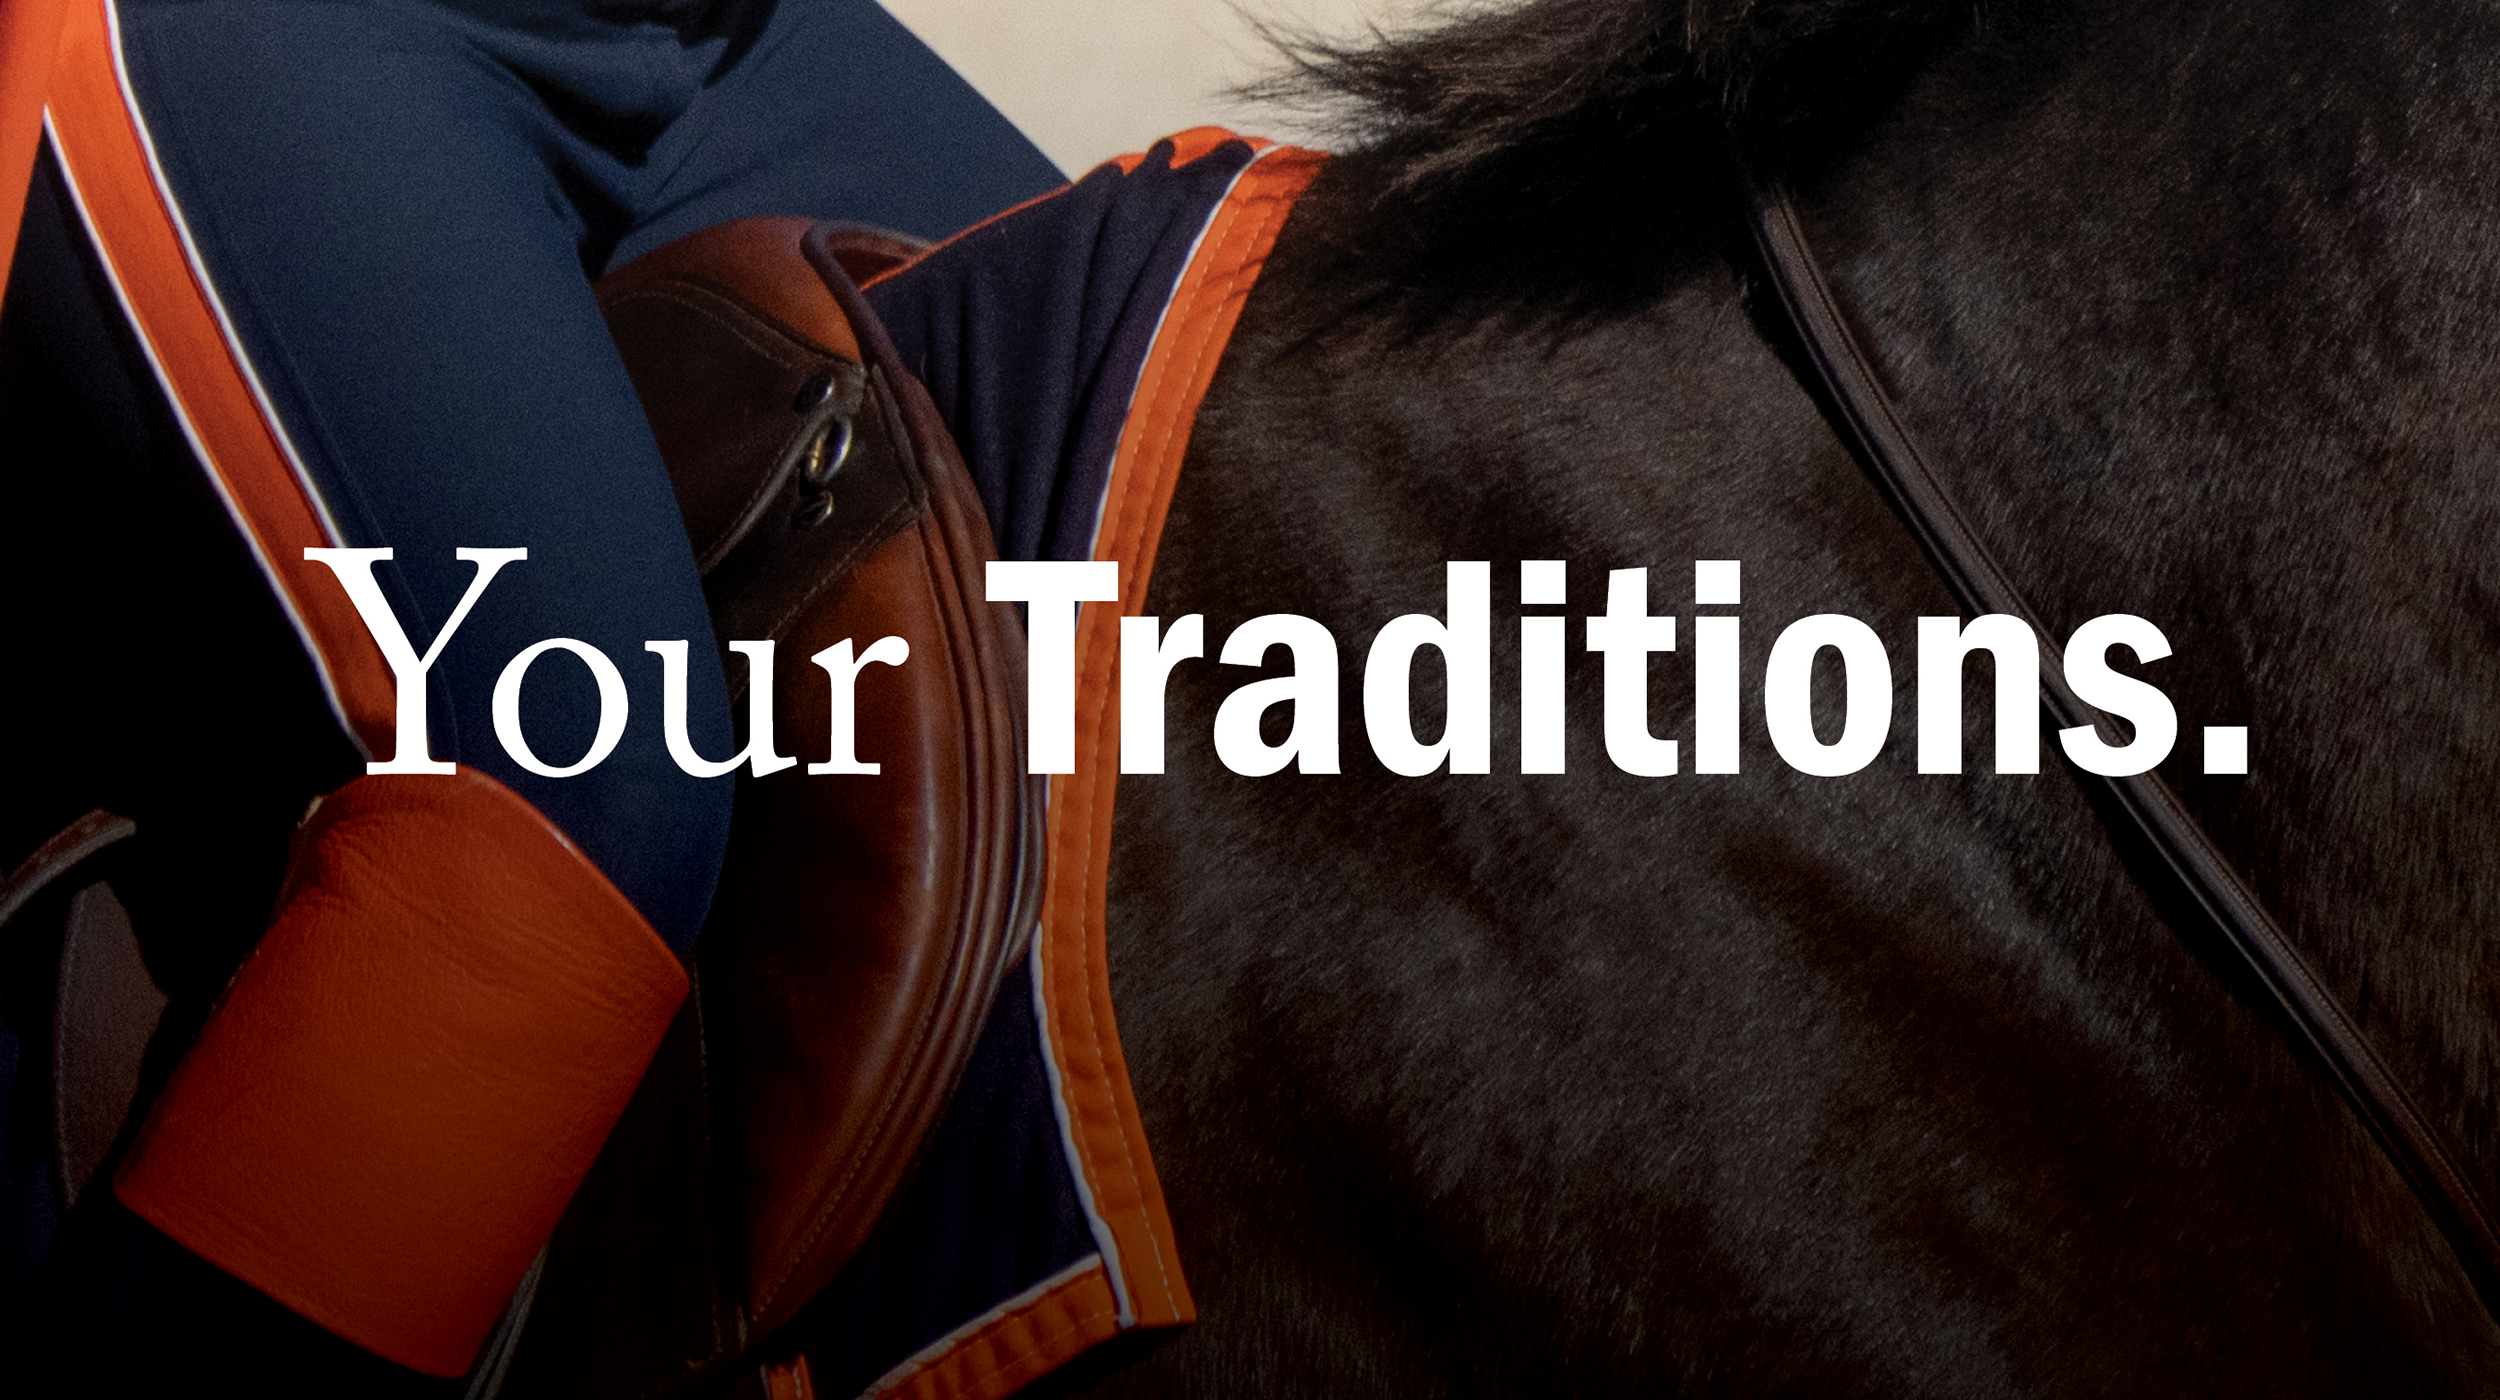 close up of cav riding horse "Your Traditions"